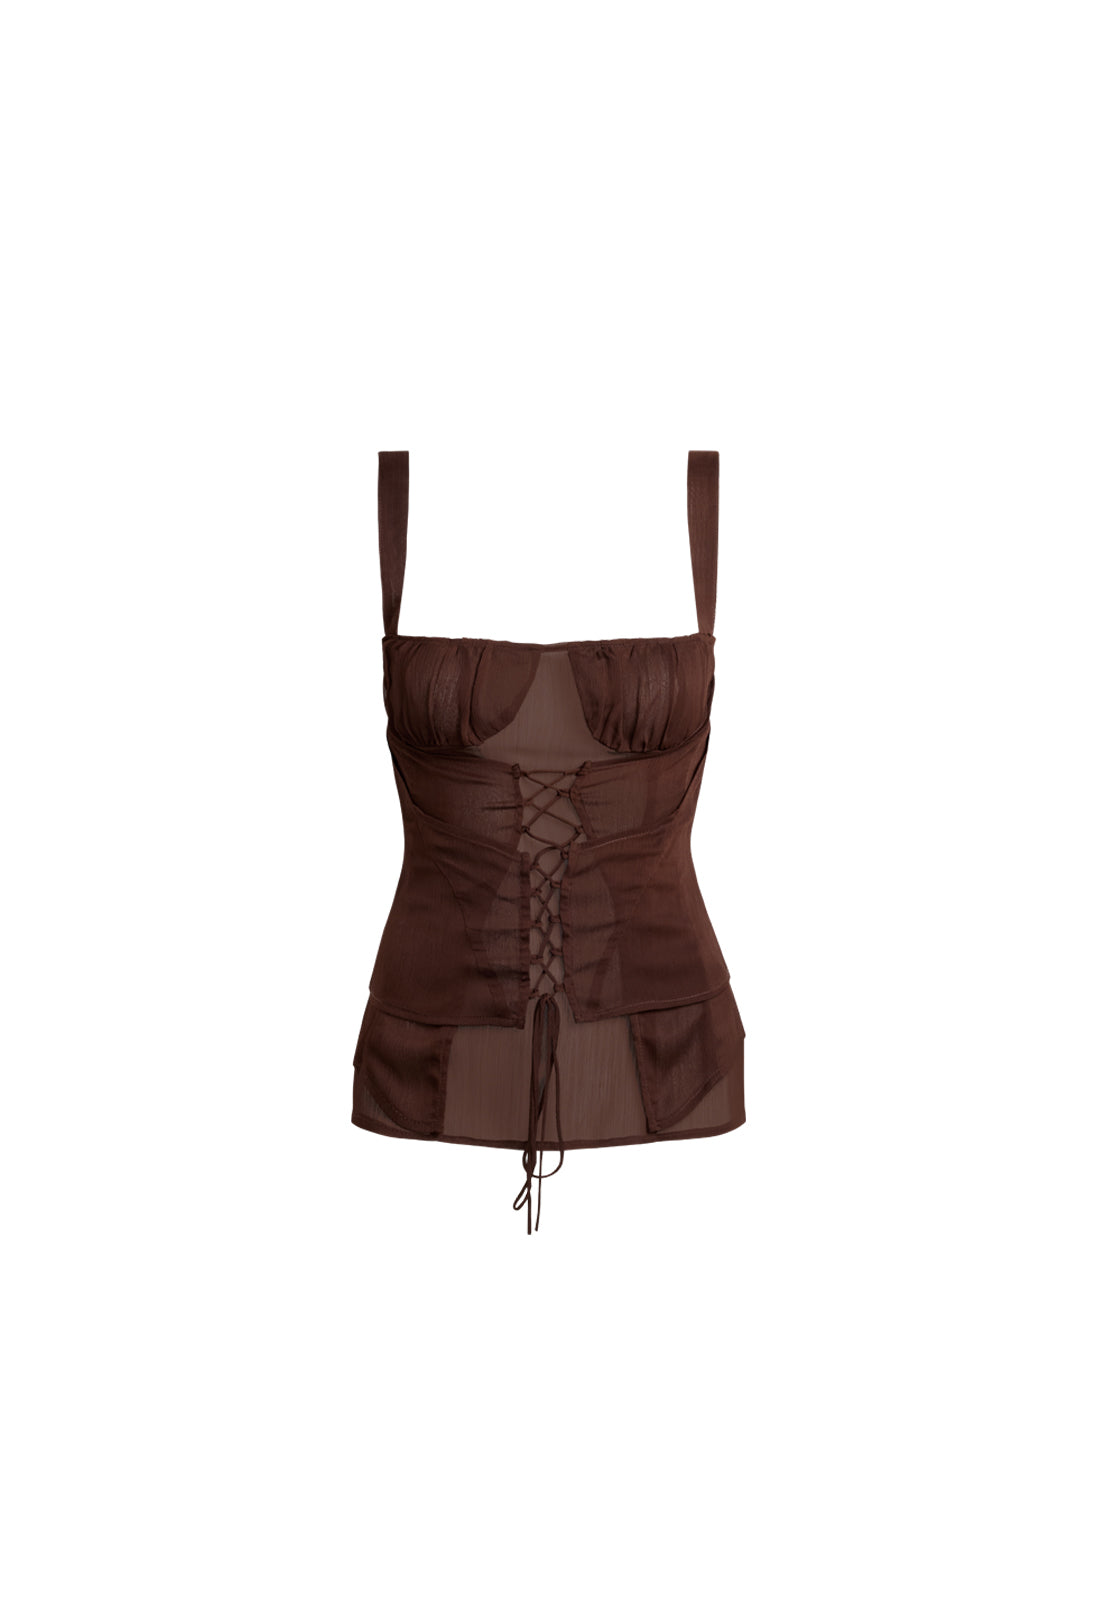 IN BLOOM TOP - CHOCOLATE